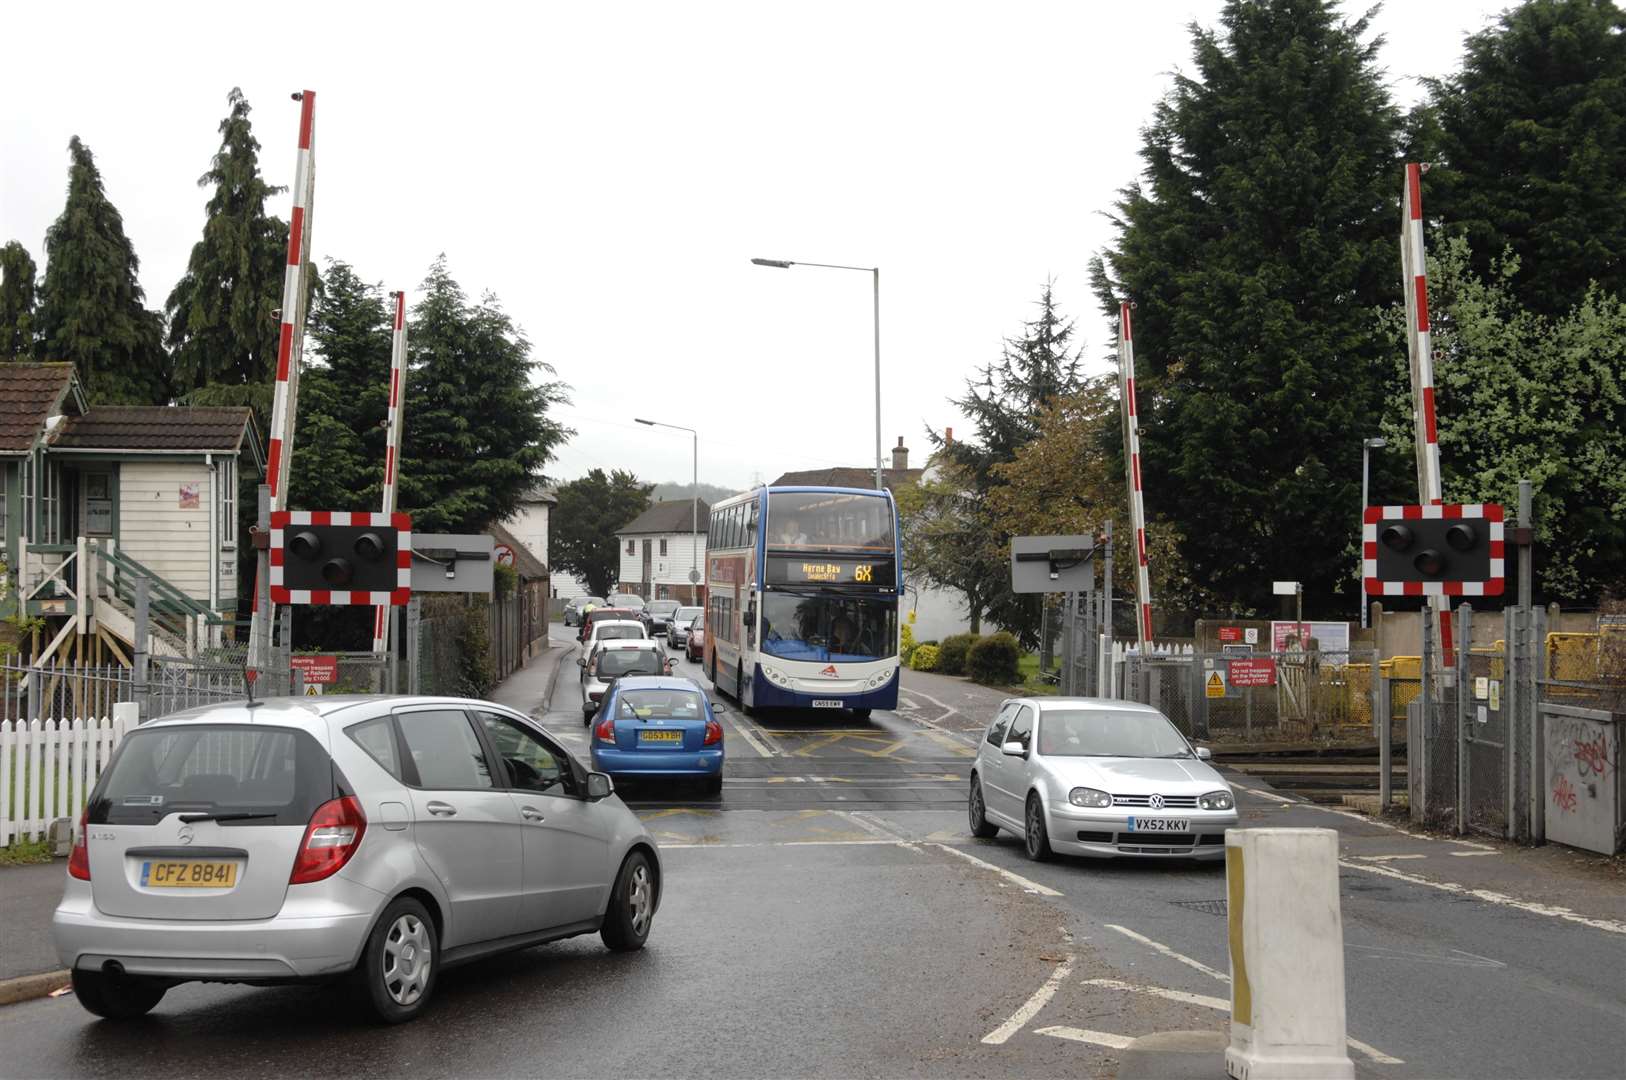 More than 20,000 vehicles use Sturry level crossing a day. It is one of the top 10 most-used crossings in the UK